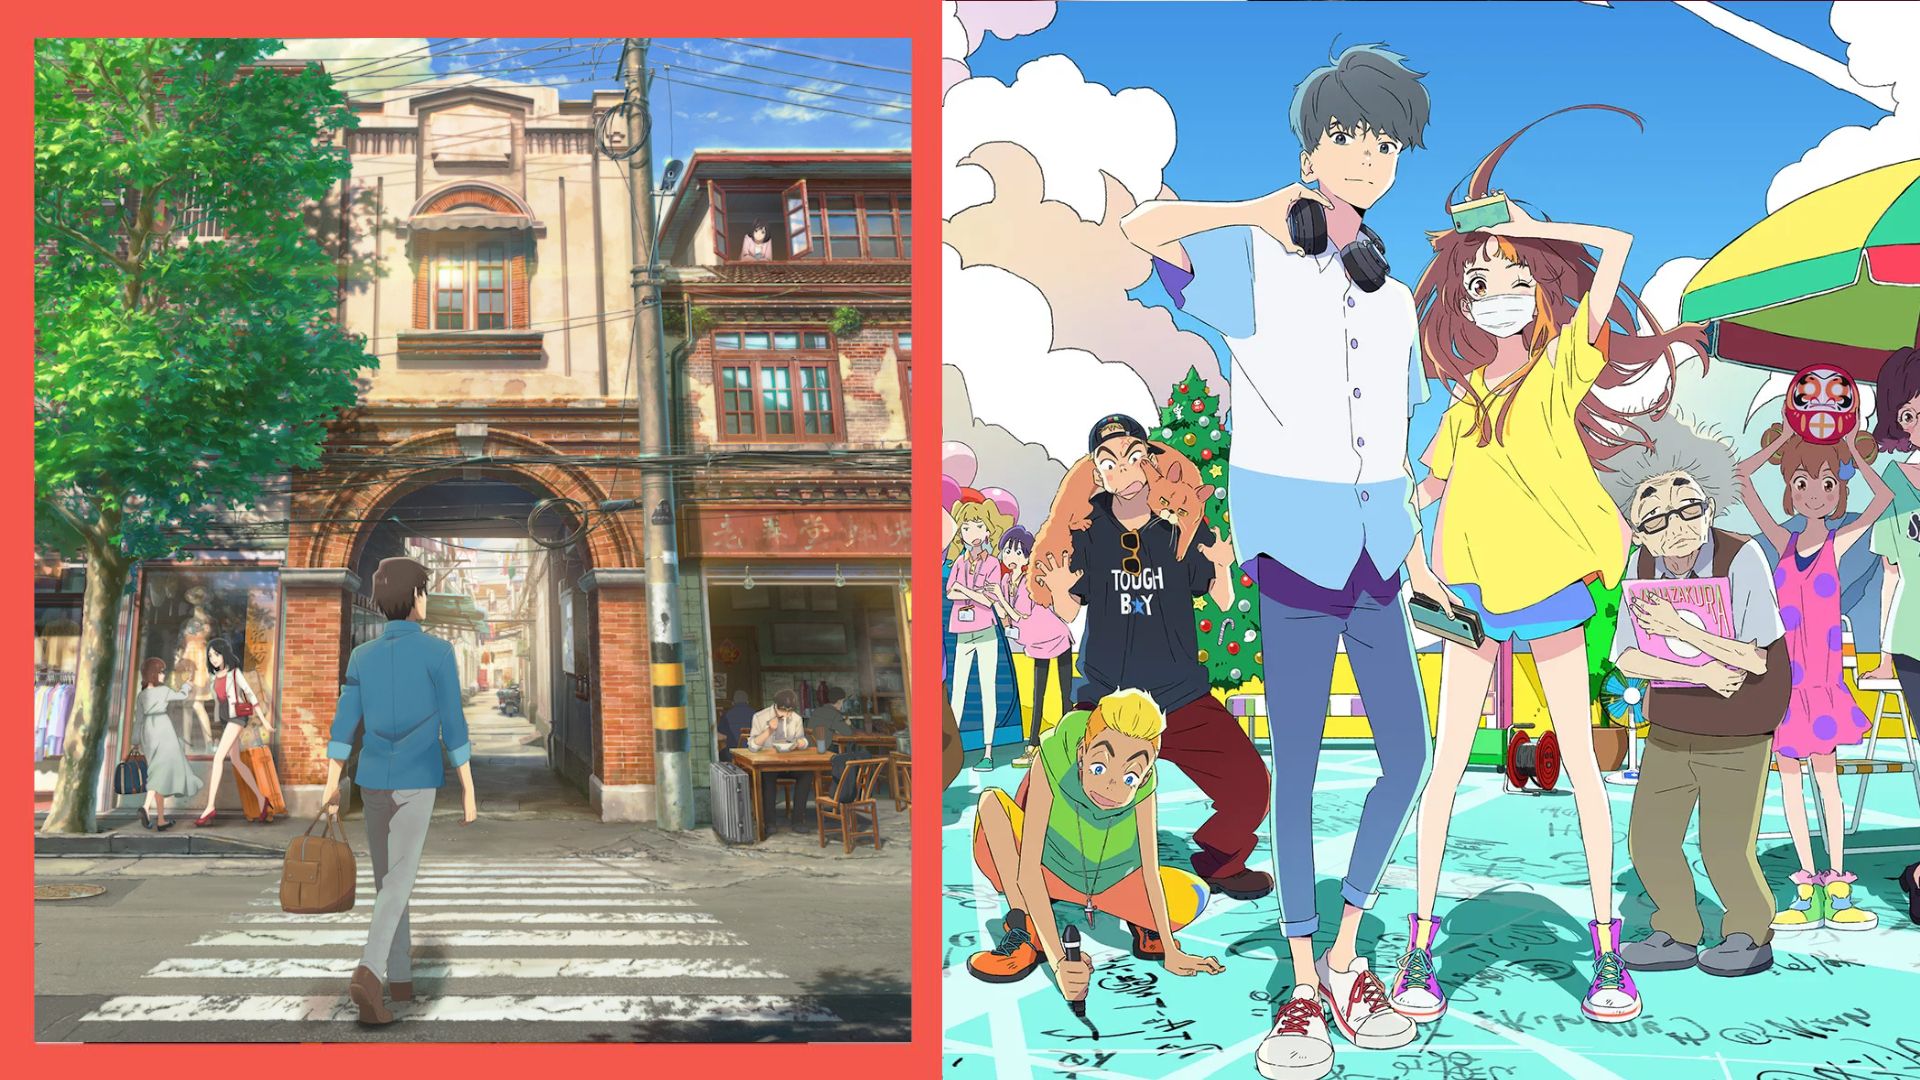 5 Slice-of-Life Anime Films and Shows You Can Watch on Netflix If You Want to Unwind